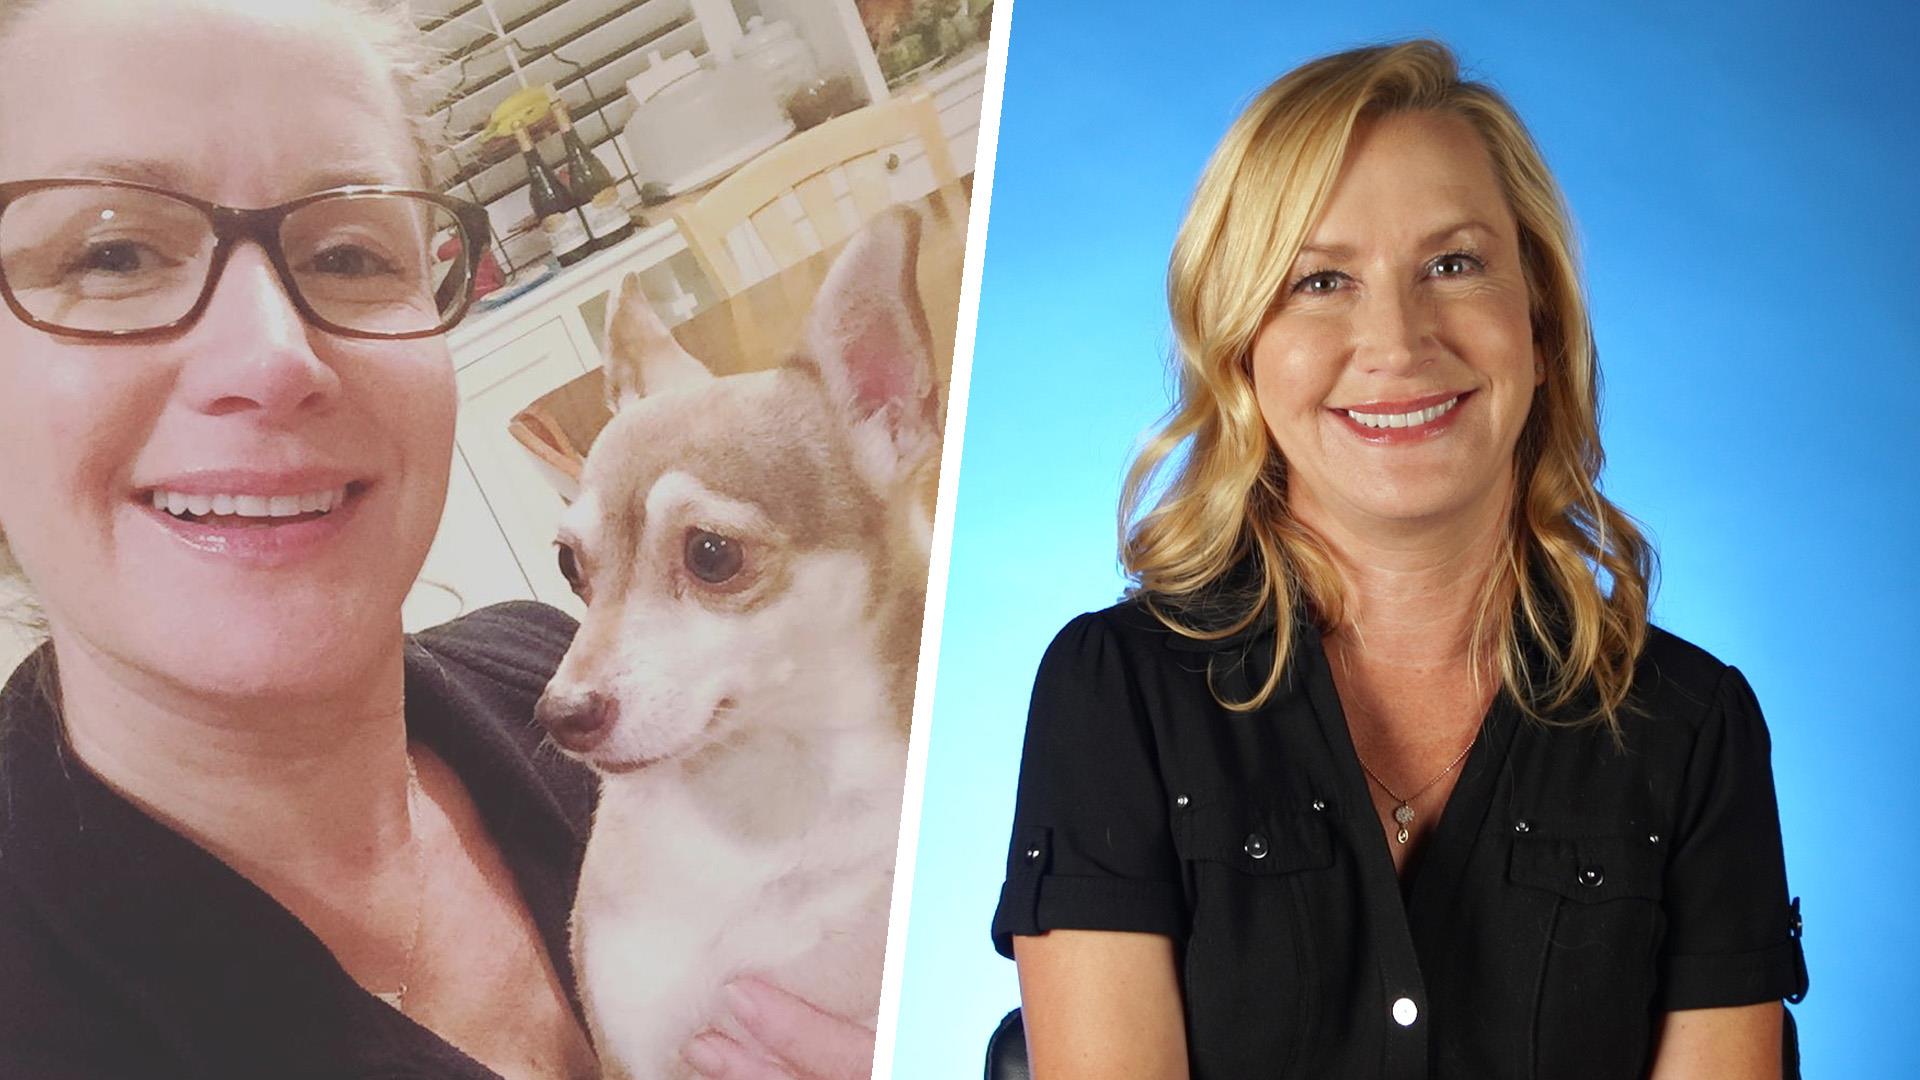 The Office' star Angela Kinsey acts out her pets' internal monolo...